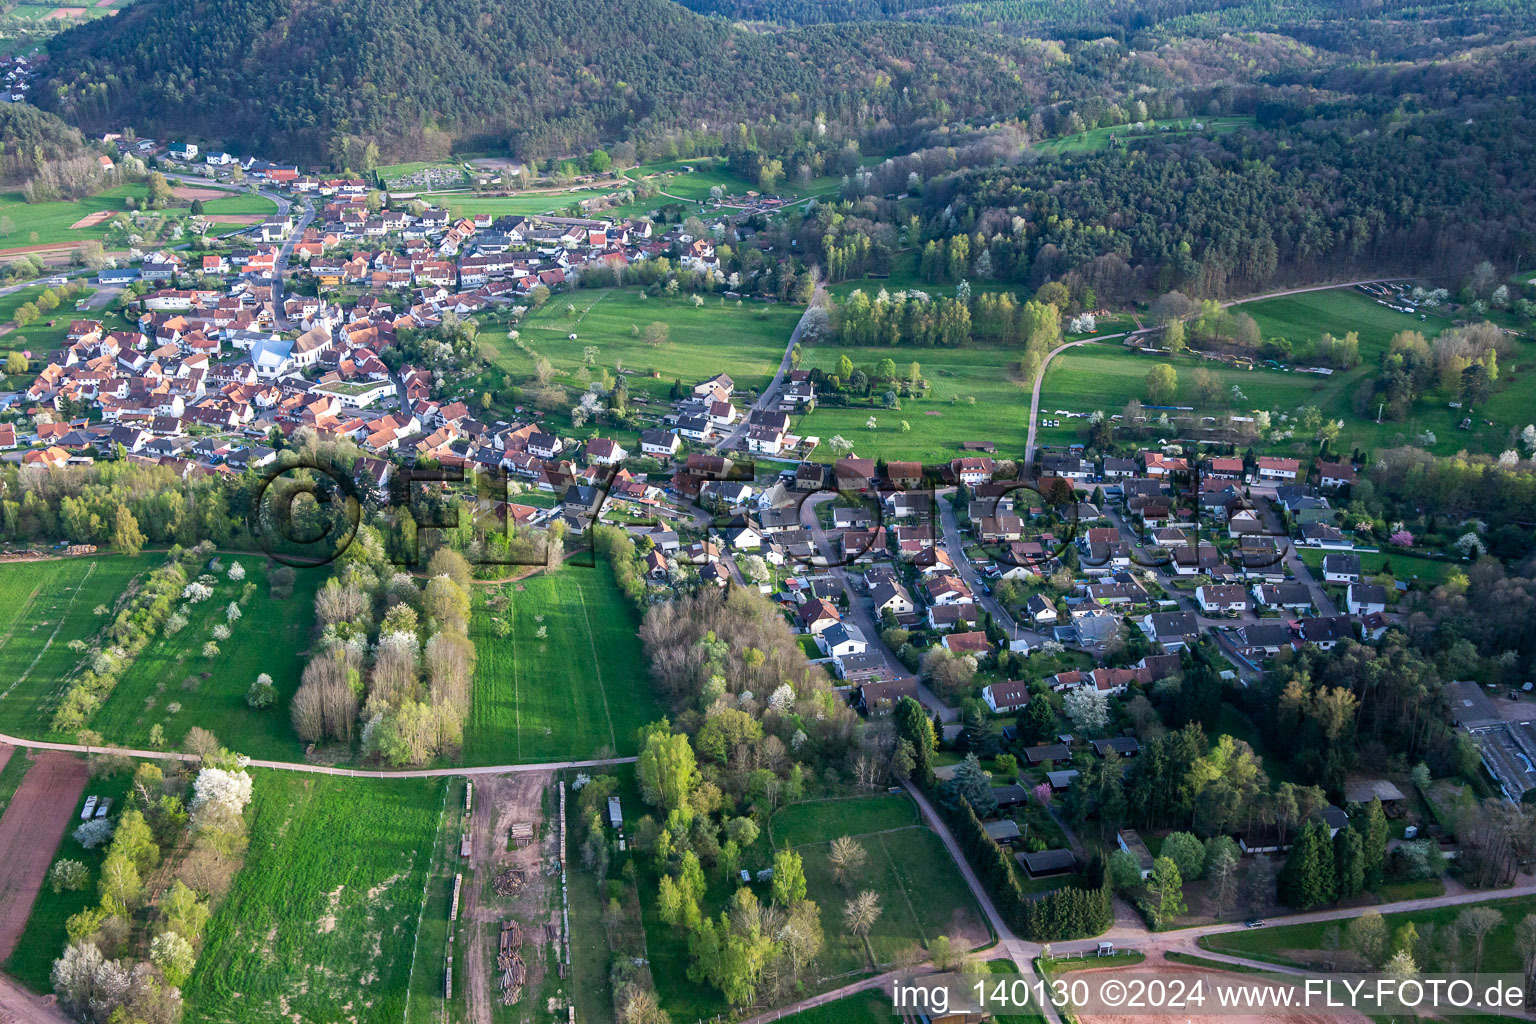 District Gossersweiler in Gossersweiler-Stein in the state Rhineland-Palatinate, Germany seen from a drone